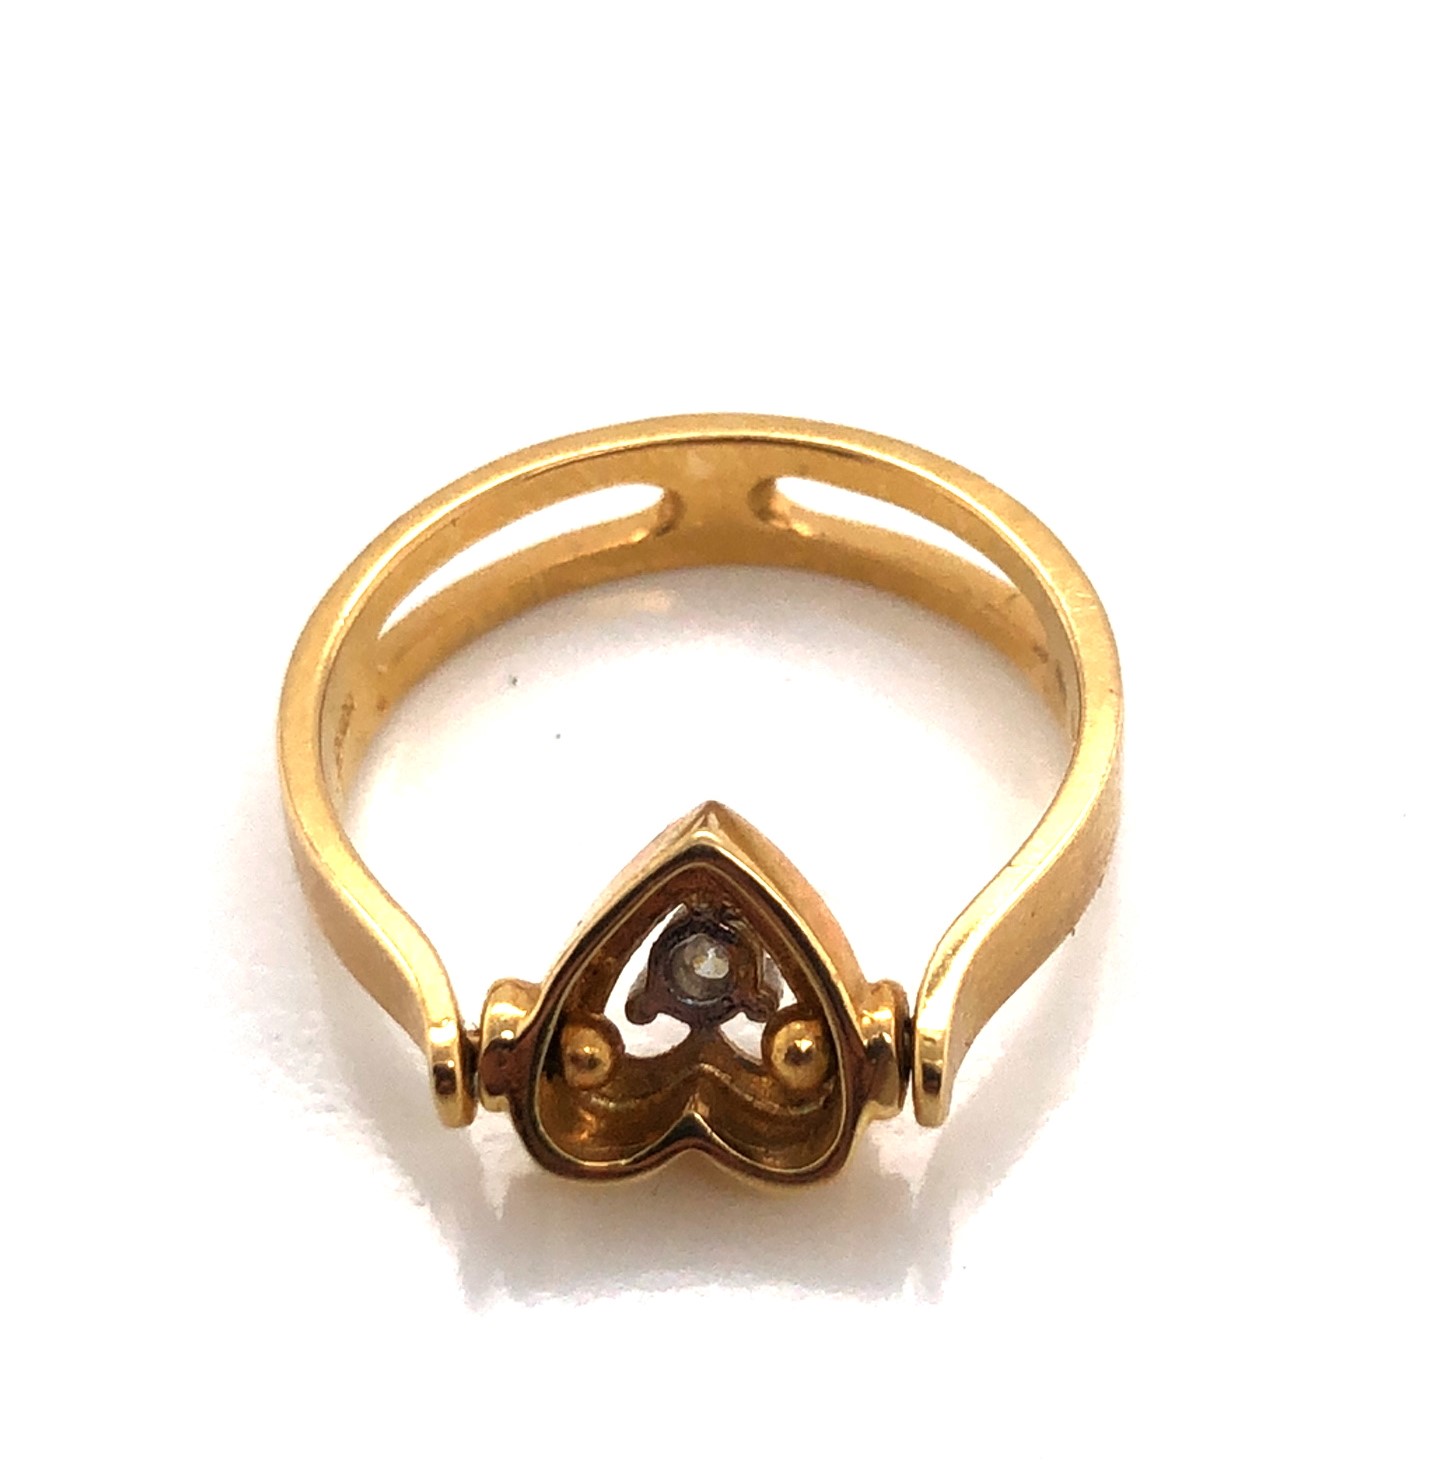 A DIAMOND SET HEART SHAPE SPINNER RING. UNHALLMARKED STAMPED 18ct AND ASSESSED AS 18ct YELLOW - Image 2 of 2